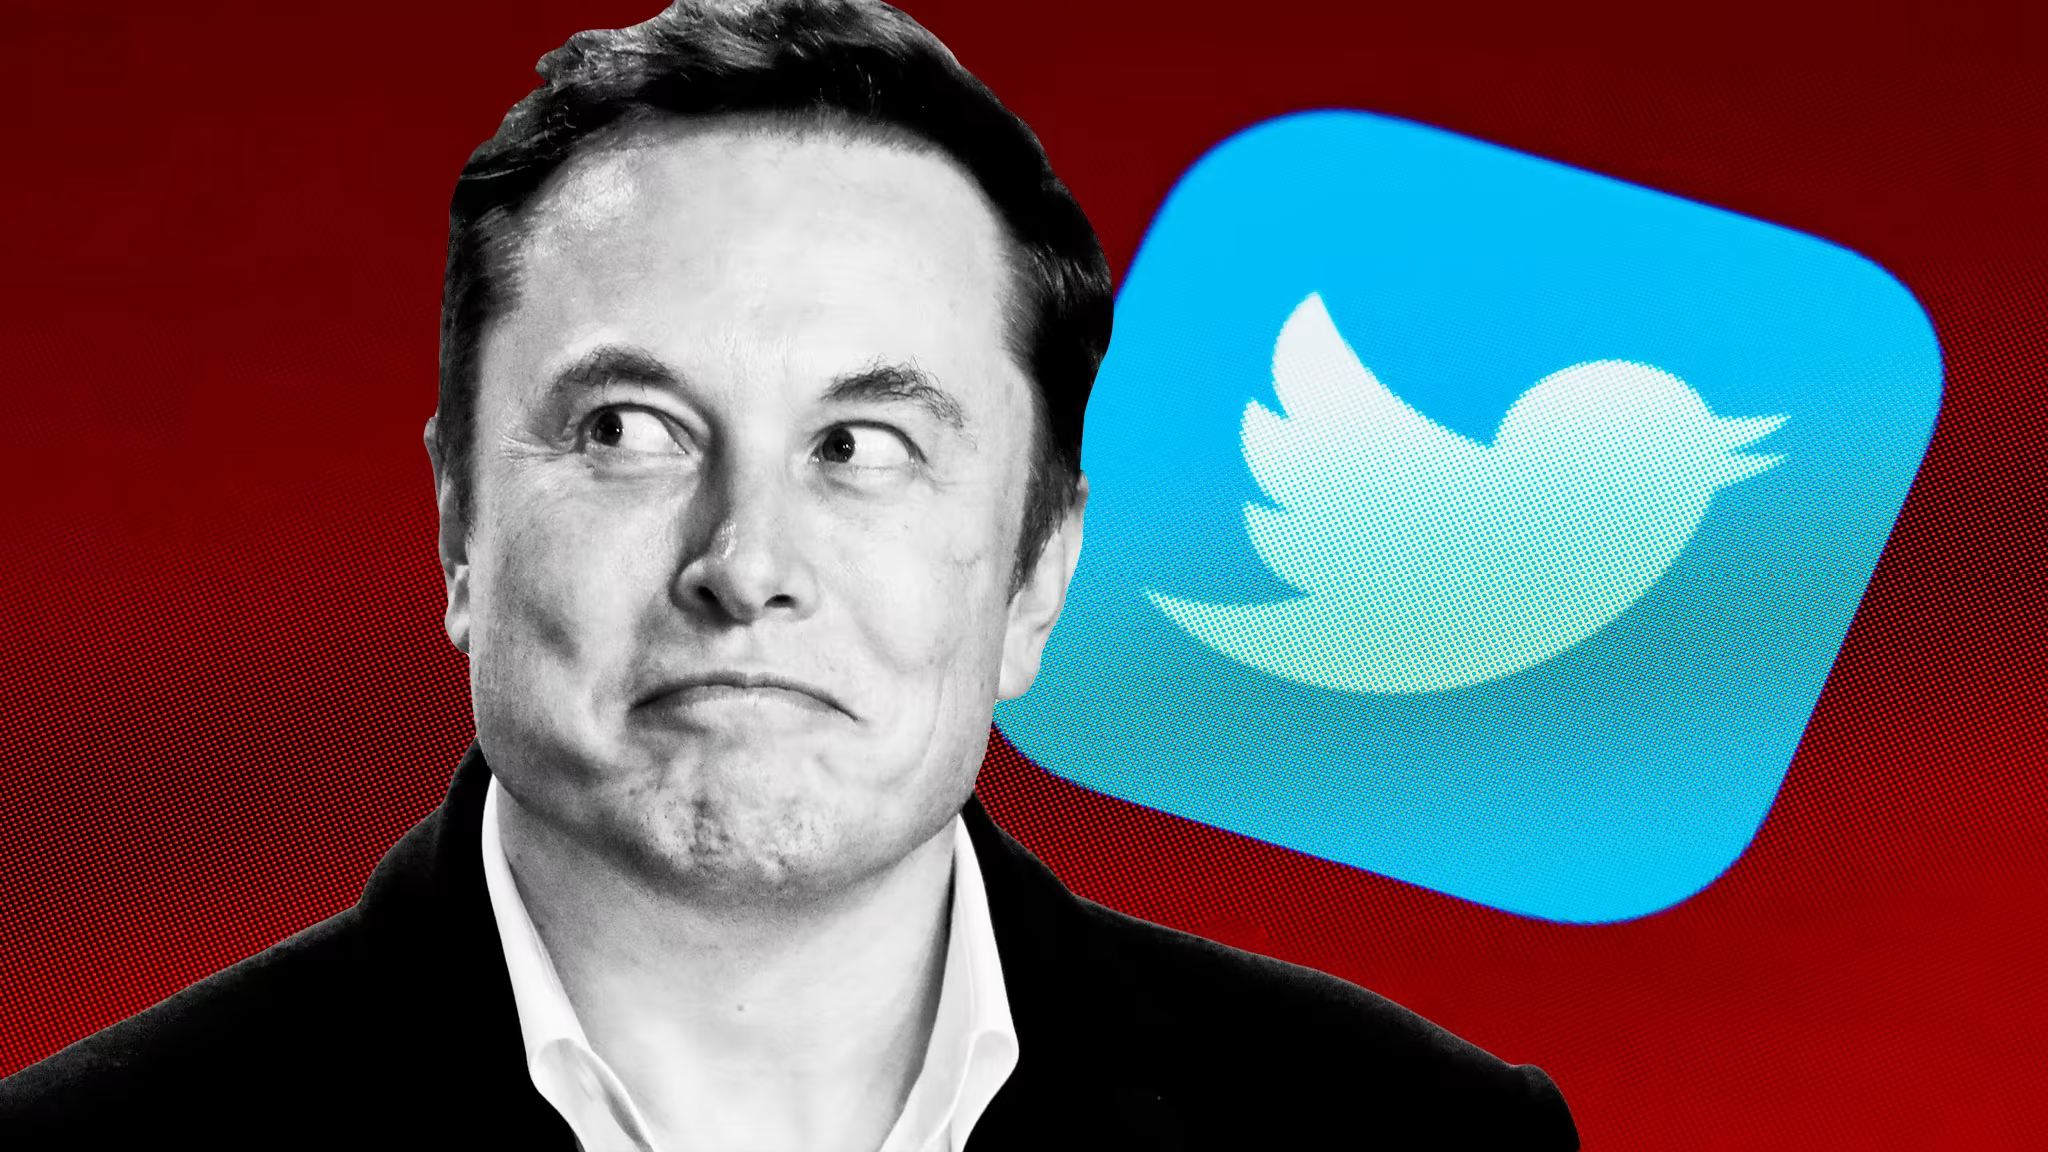 Elon Musk Receives $1.3 Billion From Crypto Friends To Support The Twitter Deal.